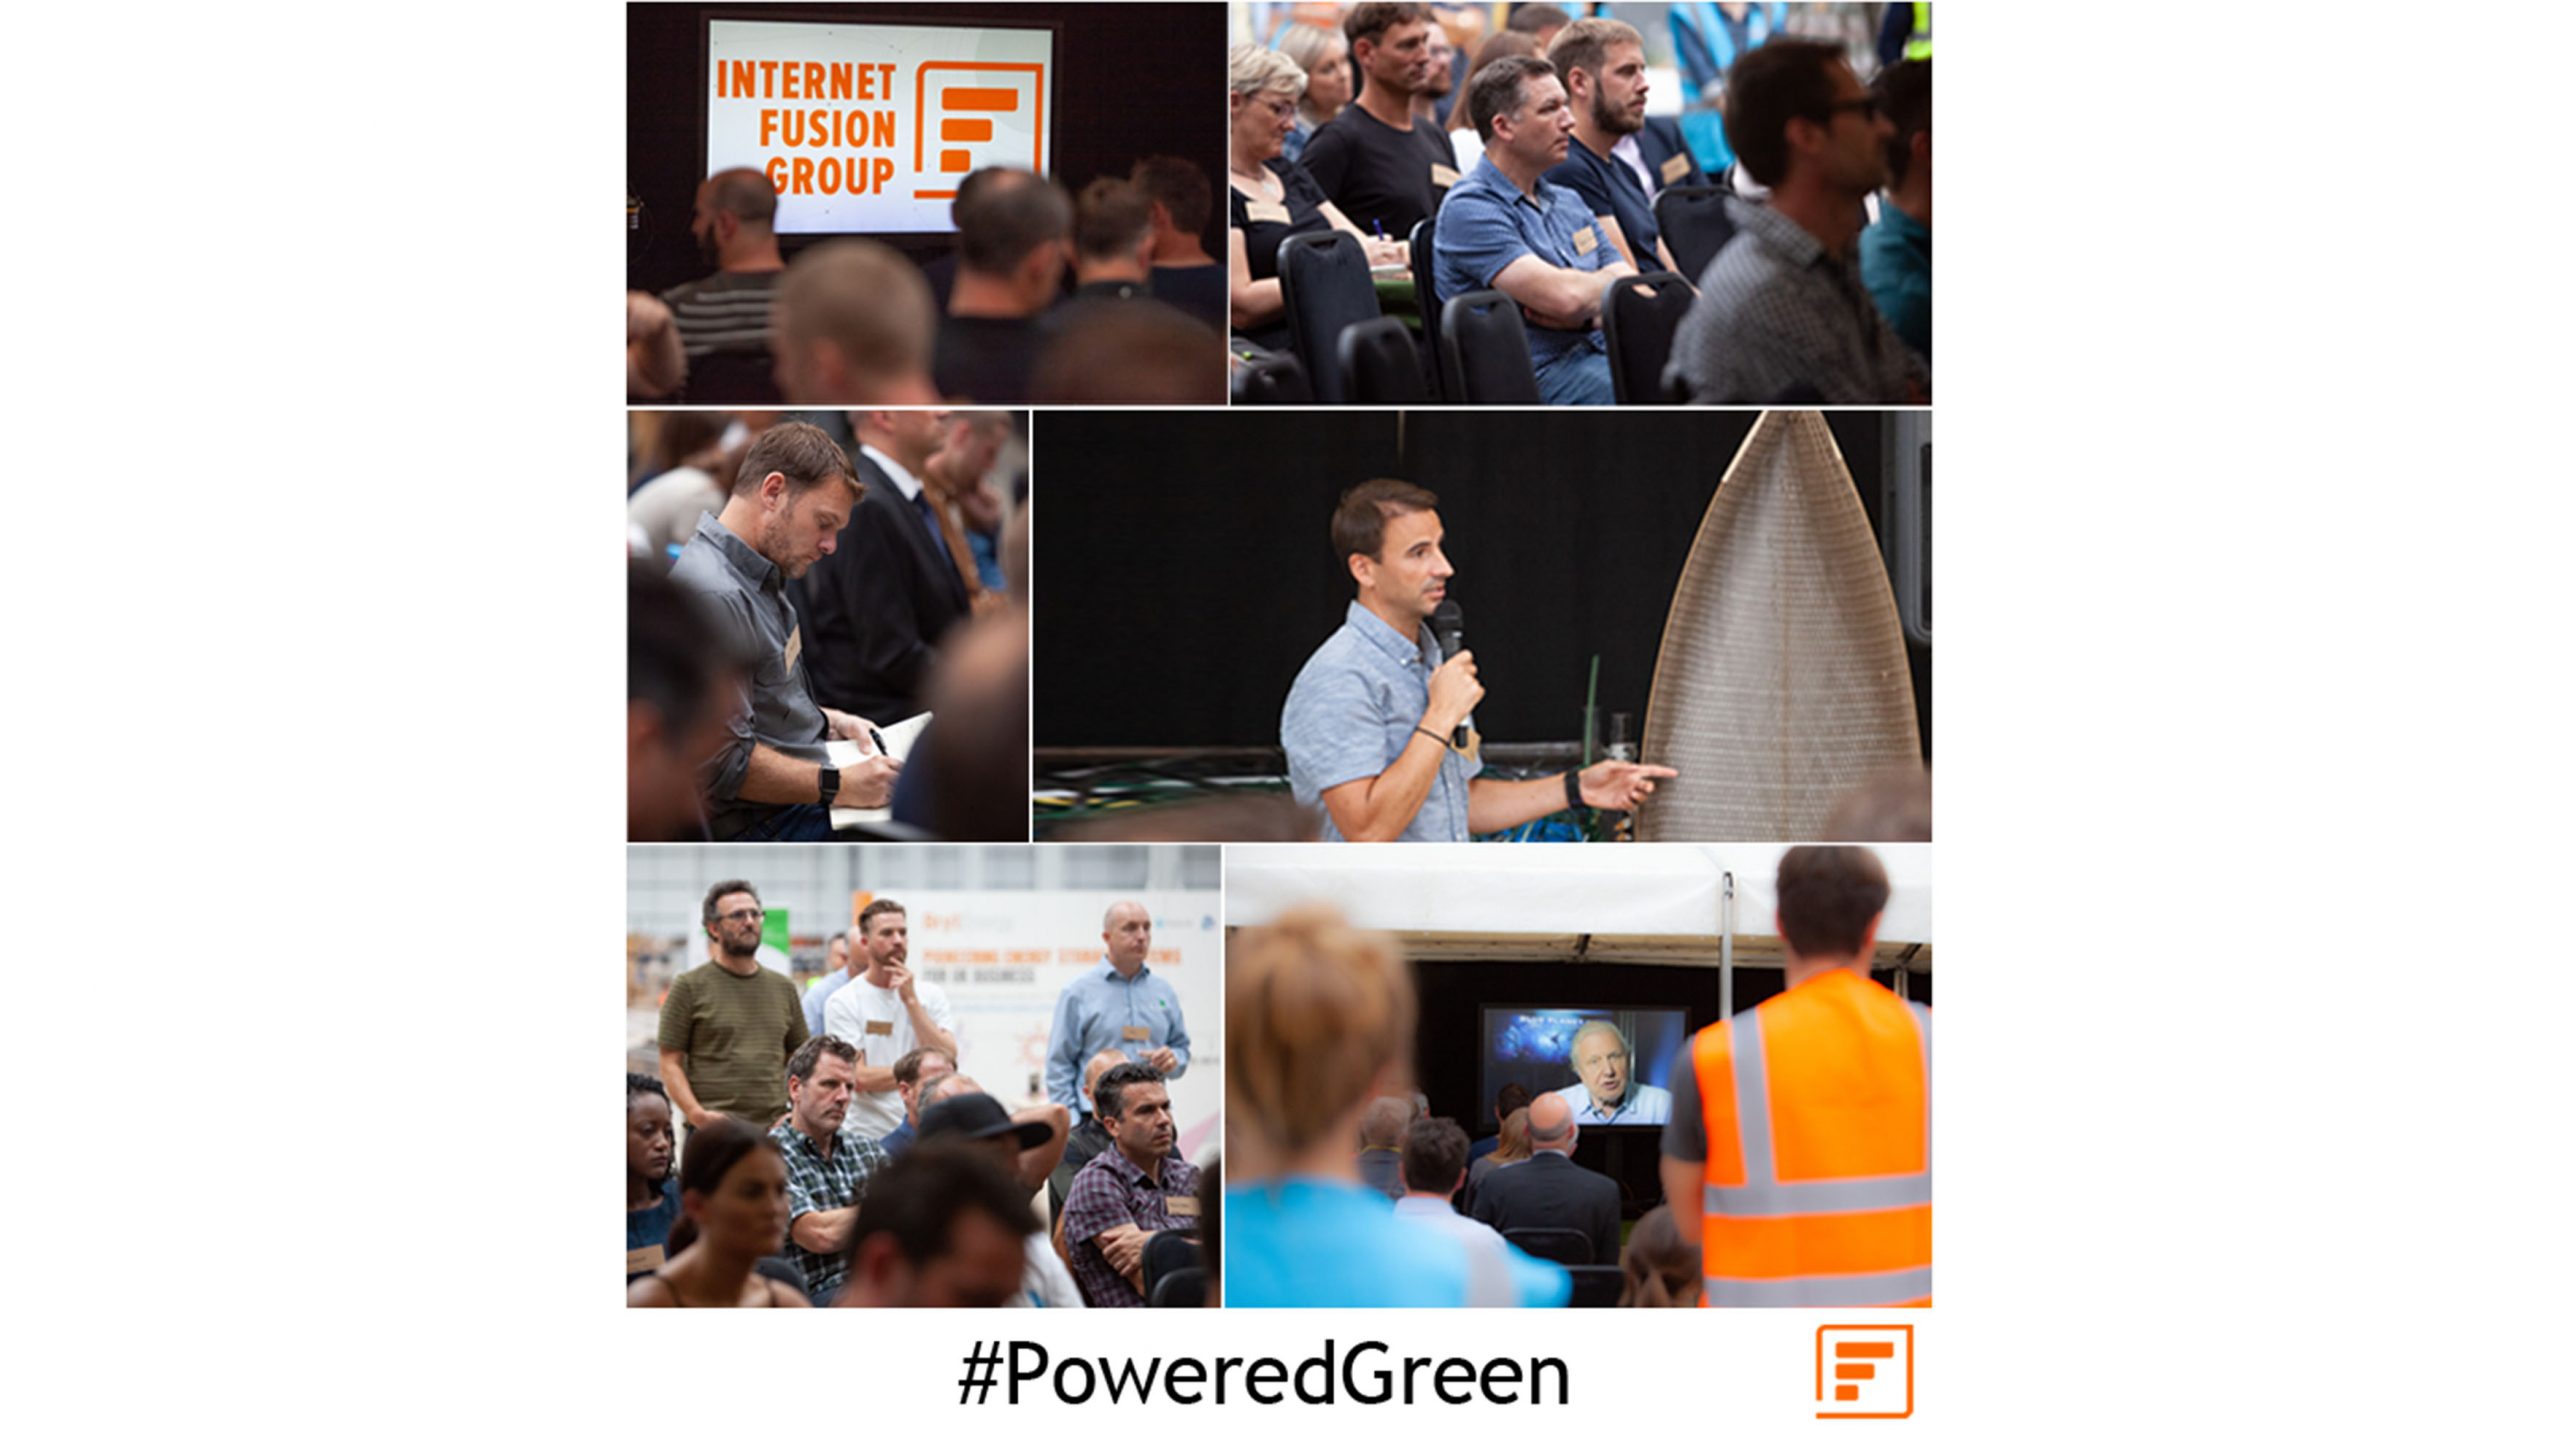 IFG Powered by green